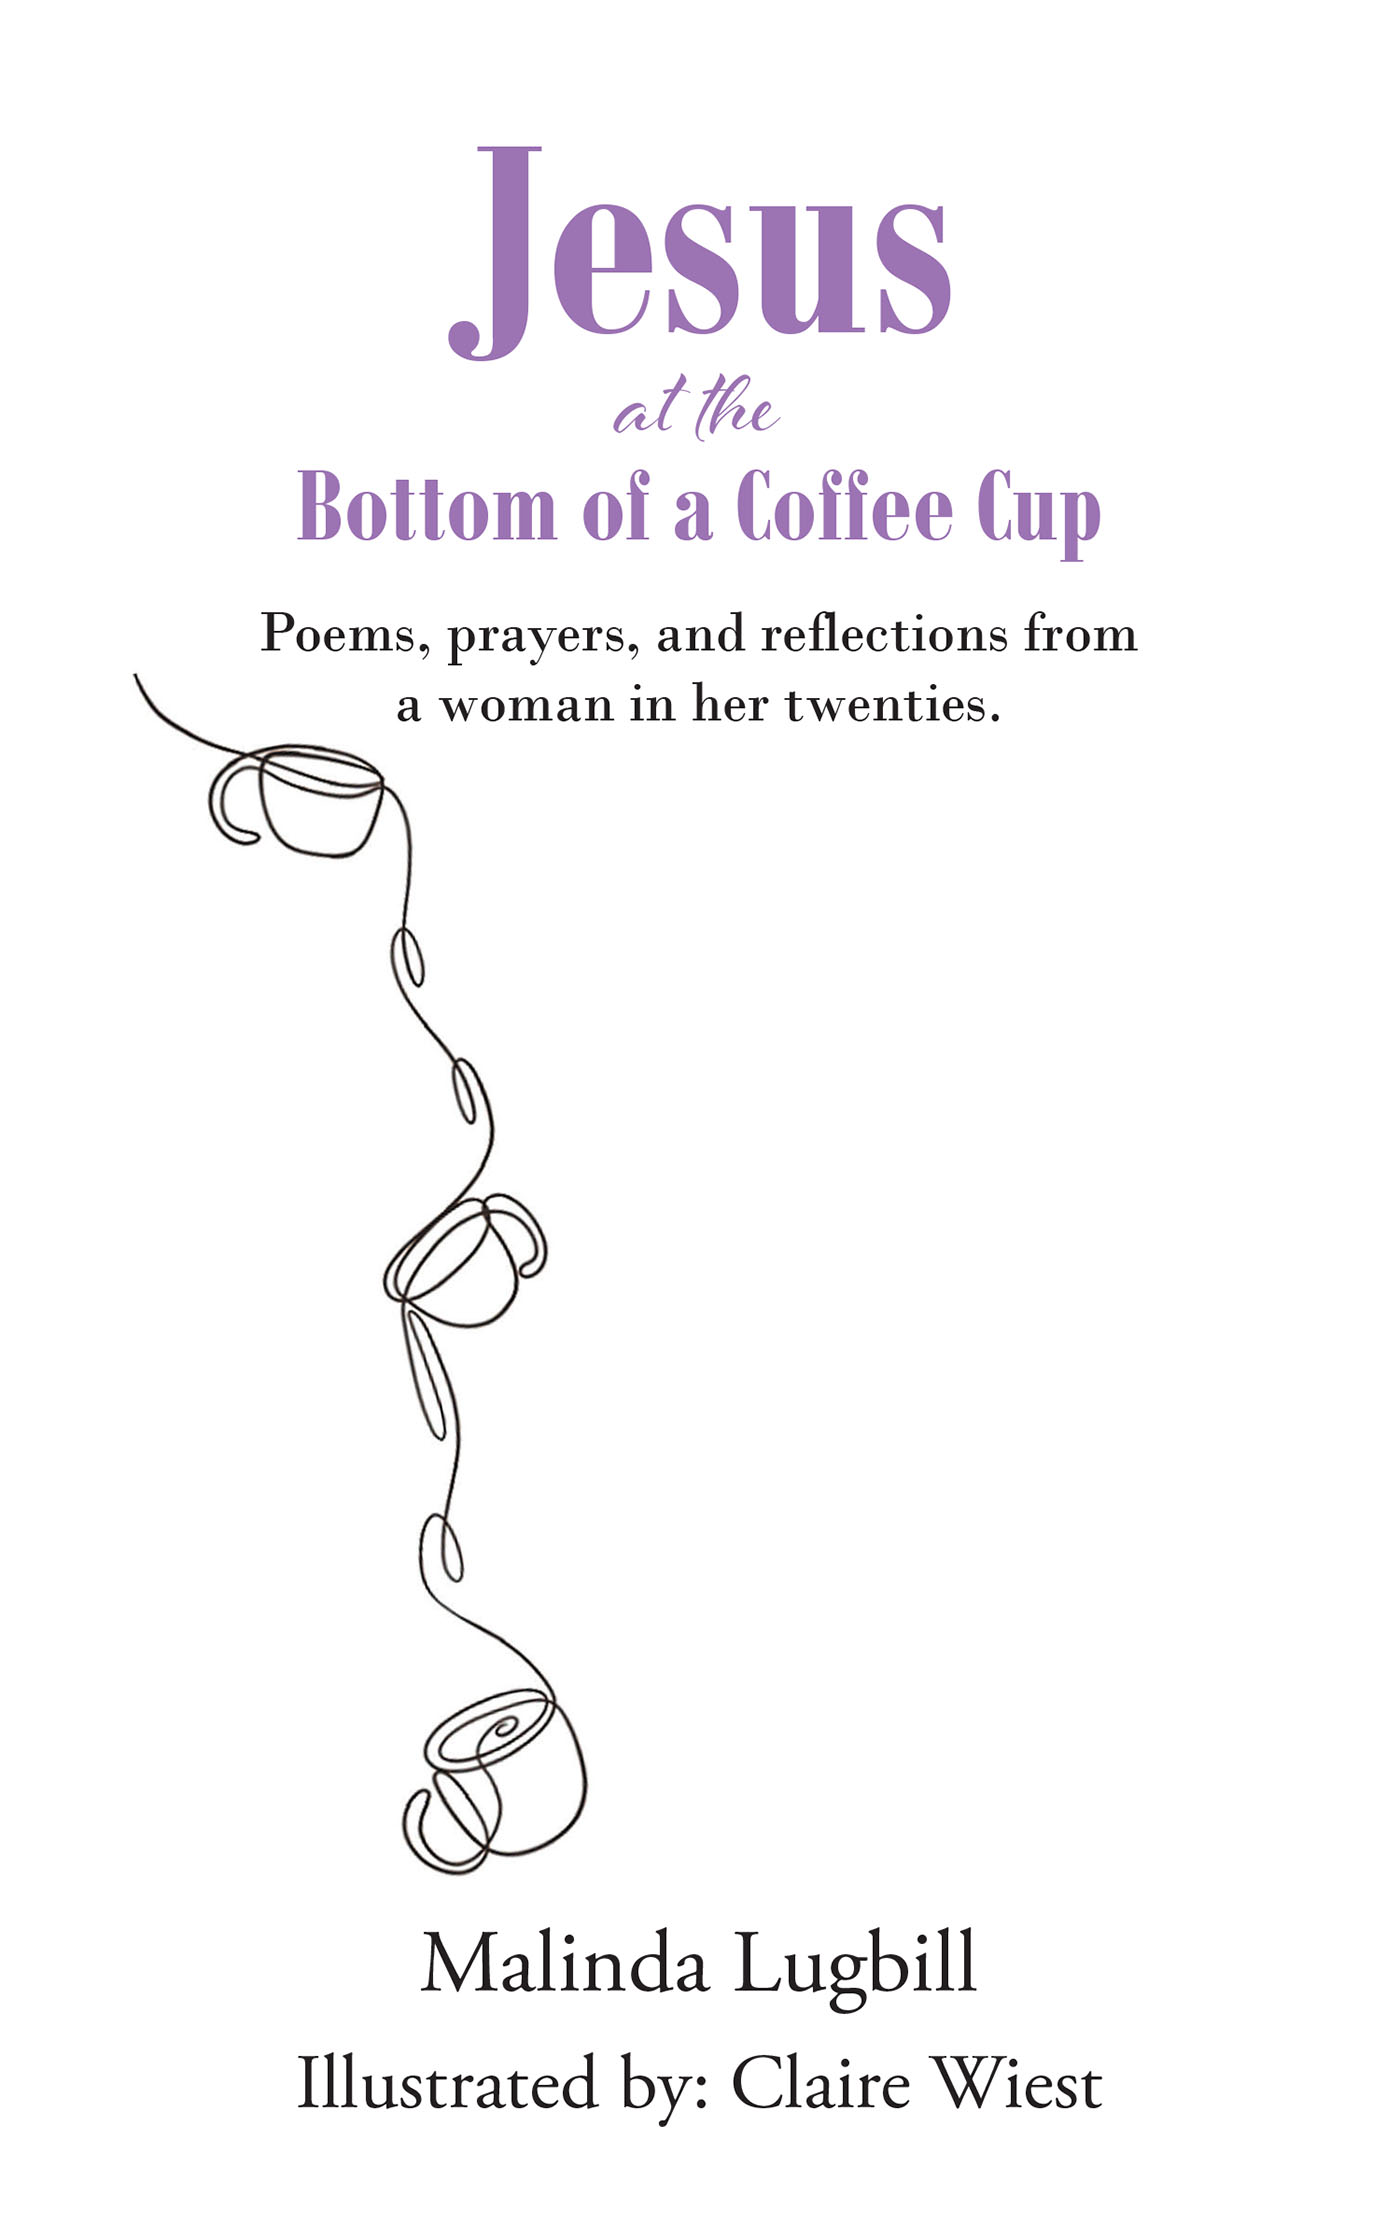 Malinda Lugbill’s Newly Released "Jesus at the Bottom of a Coffee Cup" is an Expressive Collection of Thoughtful Poetry